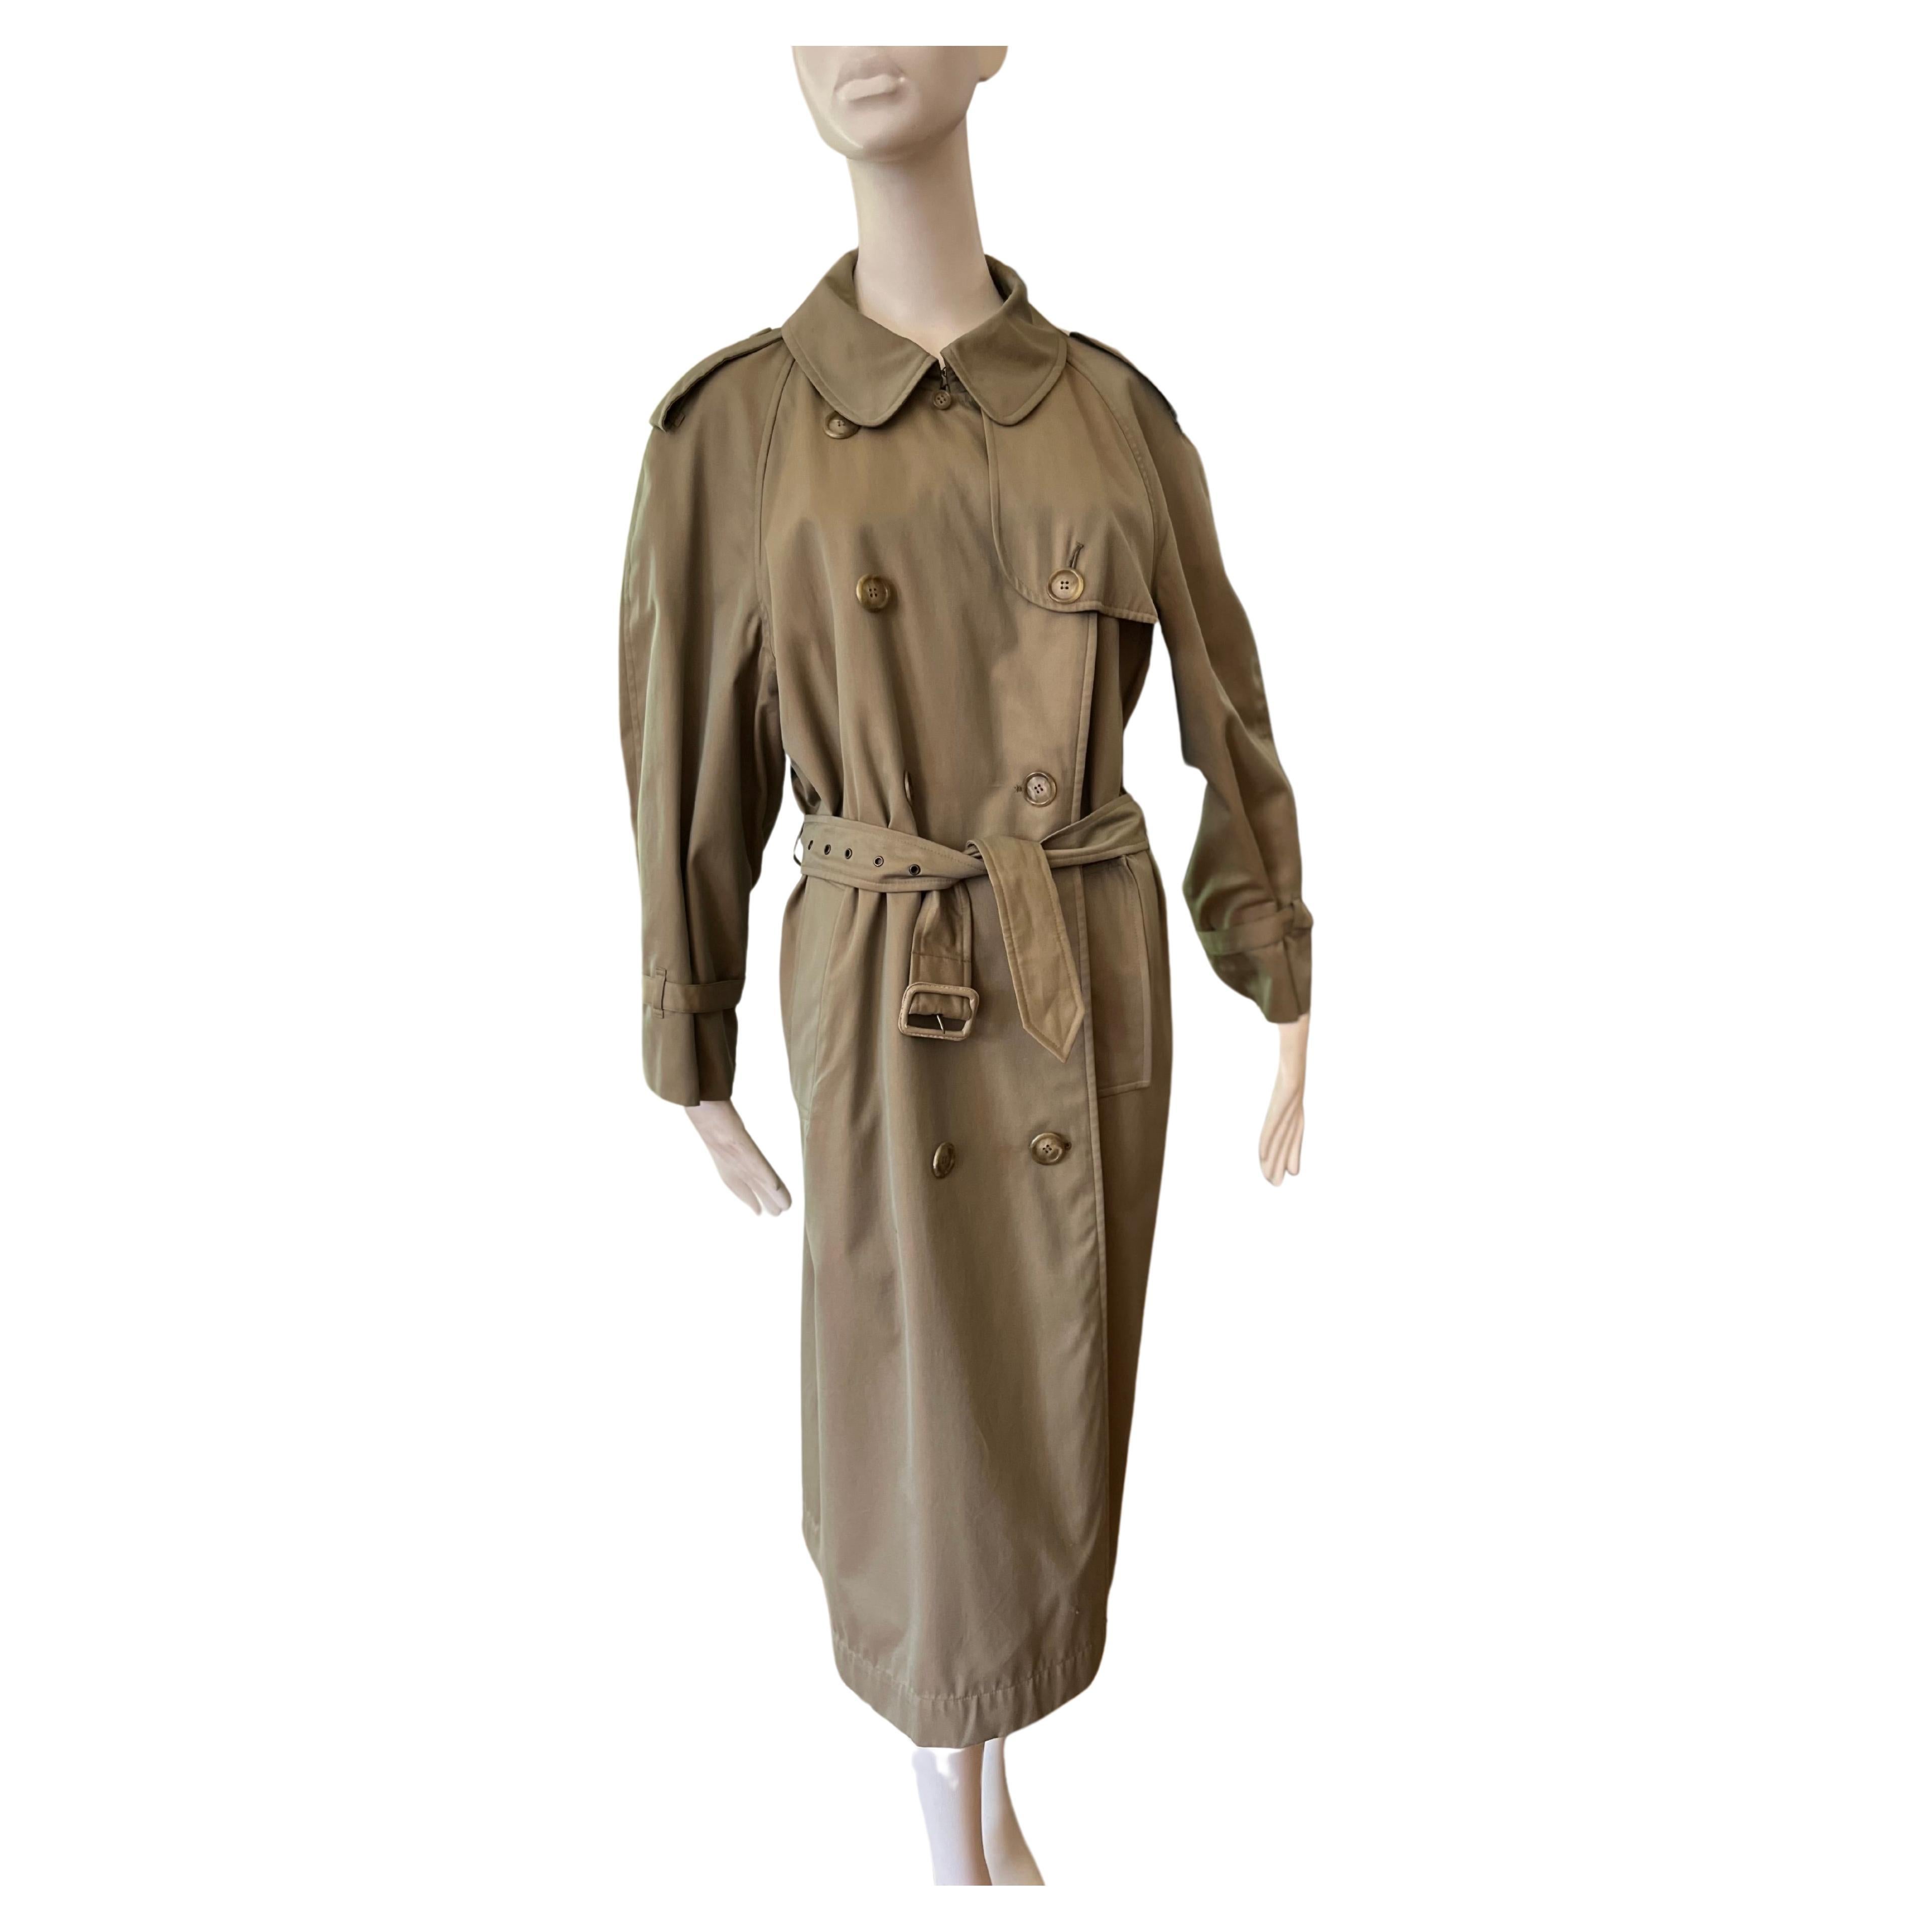 This is a classic Yves Saint Laurent 1980s cotton trench coat. The color is a luminescent green; it is double breasted; has side slit pockets; leather cuffs mini belts; epaulettes; a nice pleat at the back, and a cape effect. 